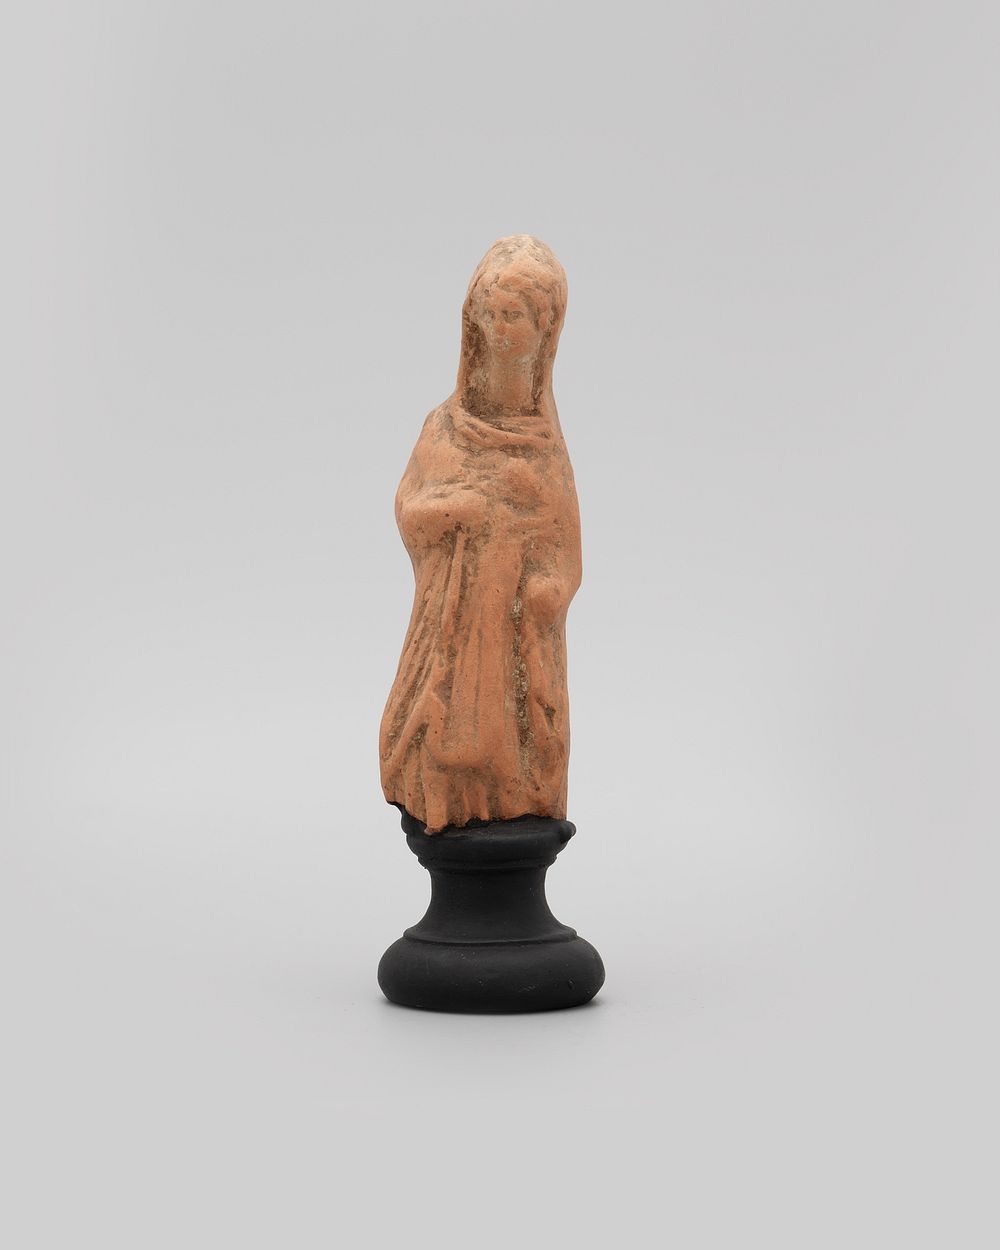 Statuette of a Woman by Ancient Greek